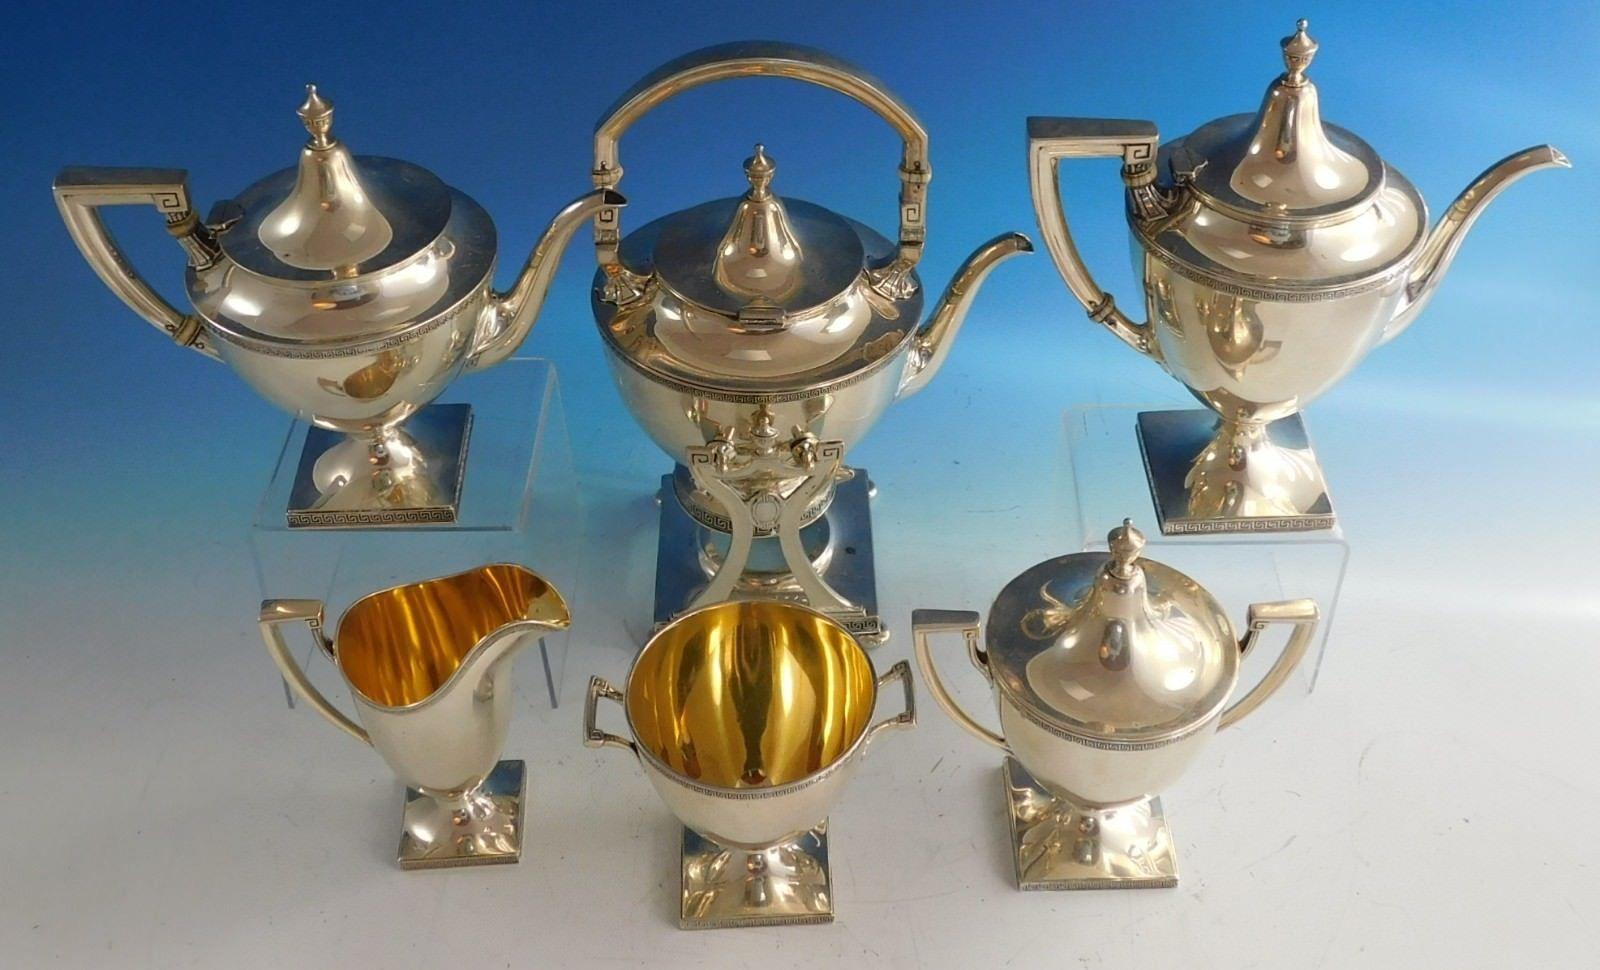 Etruscan by Gorham sterling silver 6-piece tea set with date marks for 1923. The set includes:  
1 - Impressive kettle on stand: Marked with #A9806, it weighs 42.11 ozt., and measures 12